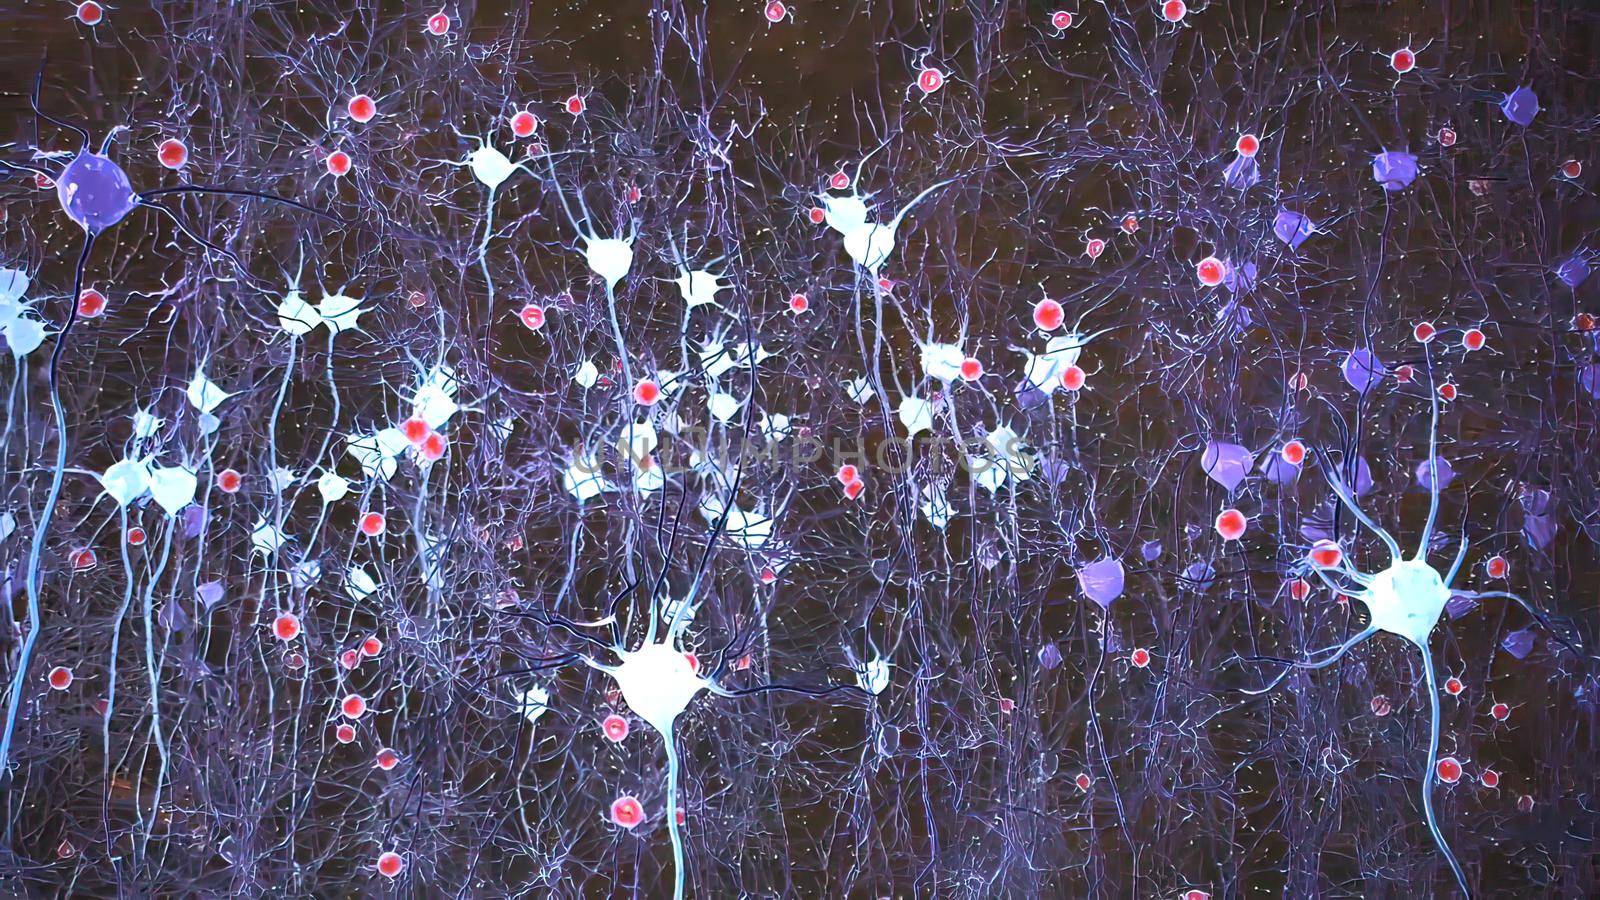 Neurons in action. electrical impulses between neuronal connections by creativepic